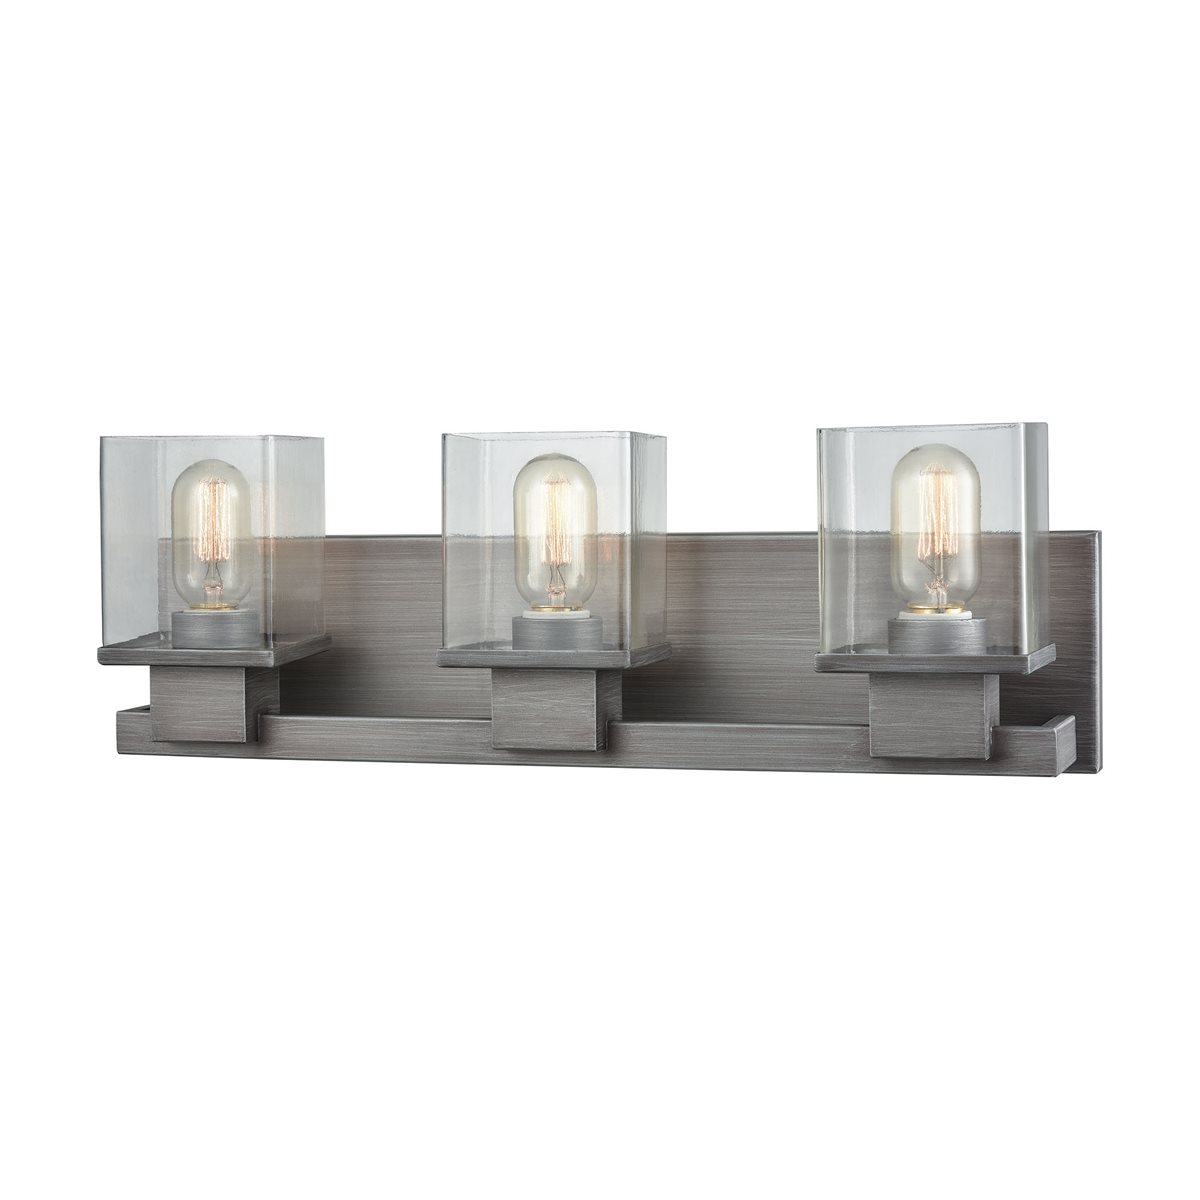 ELK Lighting Wall Sconce Lights, Furniture by ABD, Accentuations Brand 